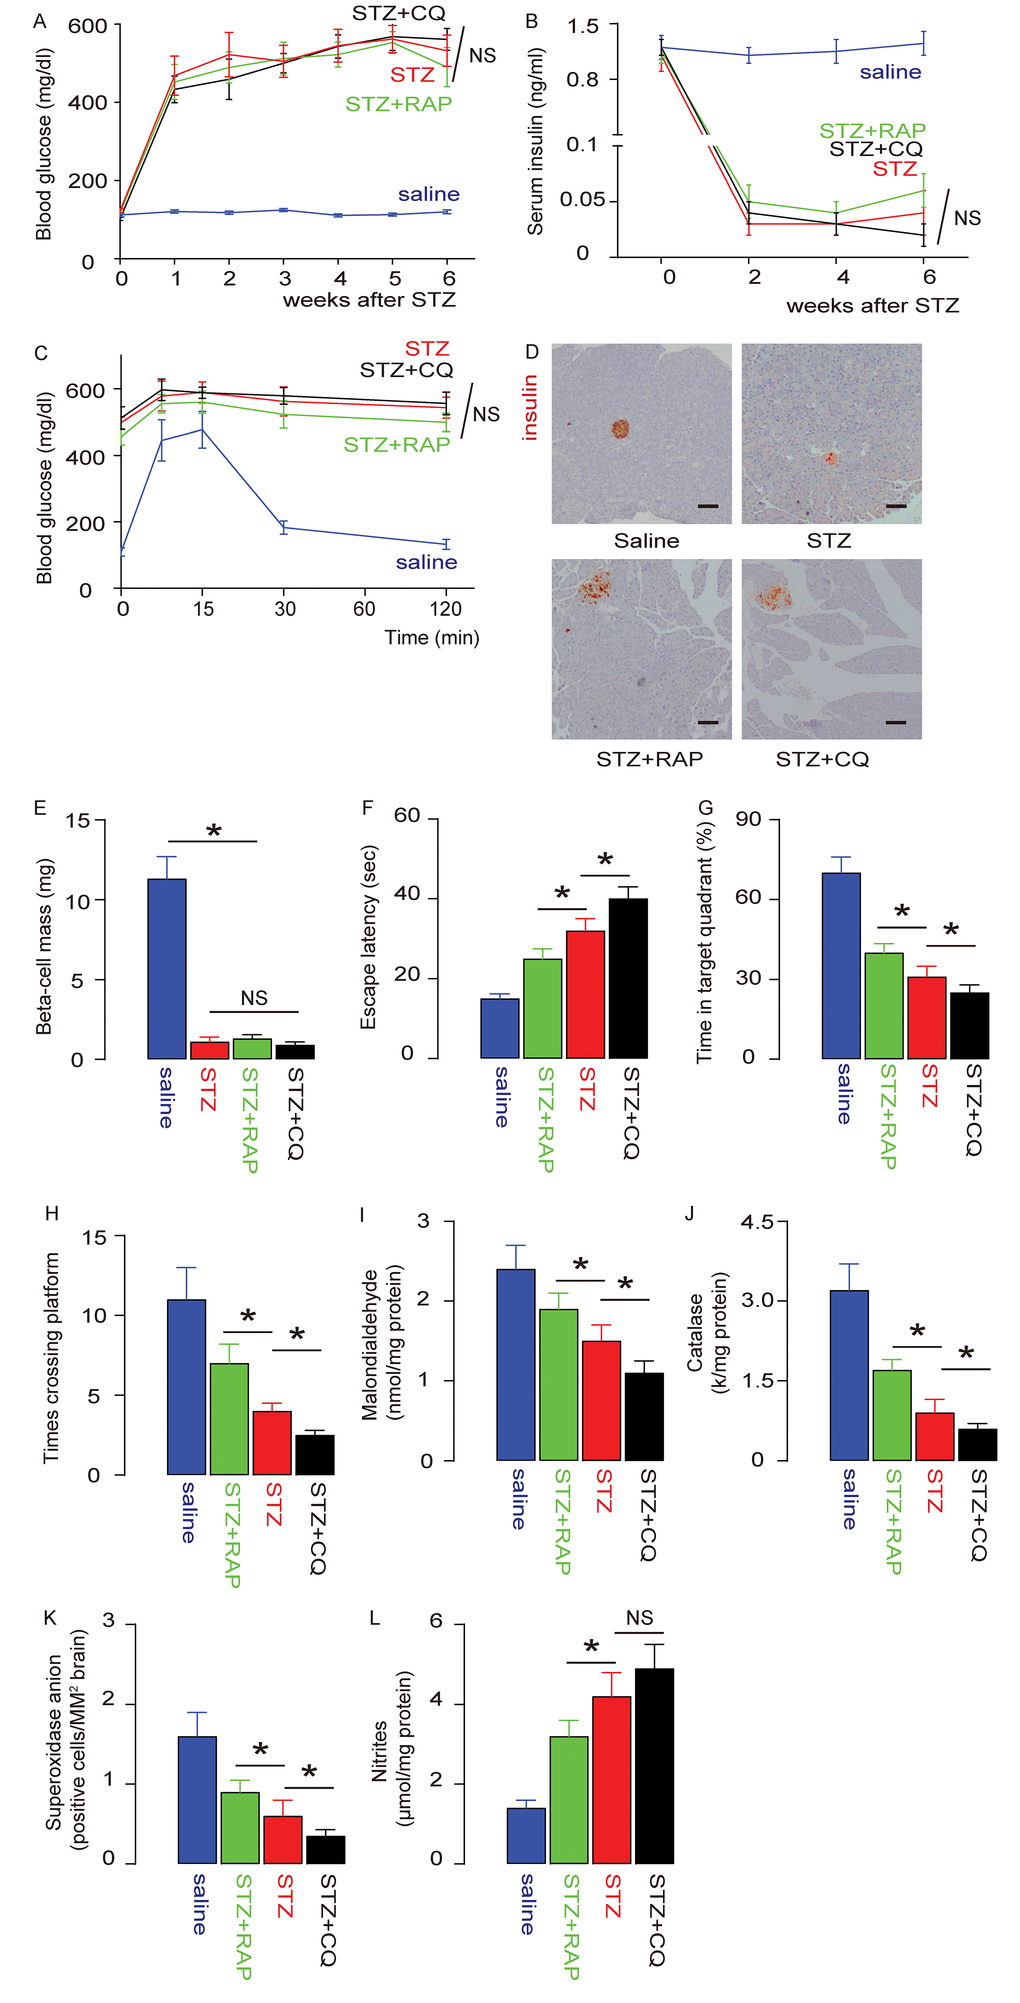 STZ-induced DE is alleviated by RAP and exacerbated by CQ. Rapamycin (RAP) or Chloroquine (CQ) were administered to STZ-treated rats. (A) Fasting glycemia in rats. (B) Serum insulin content. (C) IPGTT 6 weeks after STZ. (D) Representative immunohistochemistry for insulin in the tail pancreas of rats 6 weeks after STZ. (E) Beta-cell mass 6 weeks after STZ. (F-H) The development of DE was assessed by an MWM assay. (F) The escape latency. (G) The percentage of time spent in the target quadrant. (H) The number of times that the rats crossed the platform. (I-L) Assessment of brain degradation markers. (I) Brain Malondialdehyde. (J) Catalase. (K) Superoxidase anion-positive cells. (L) Nitrites. *p